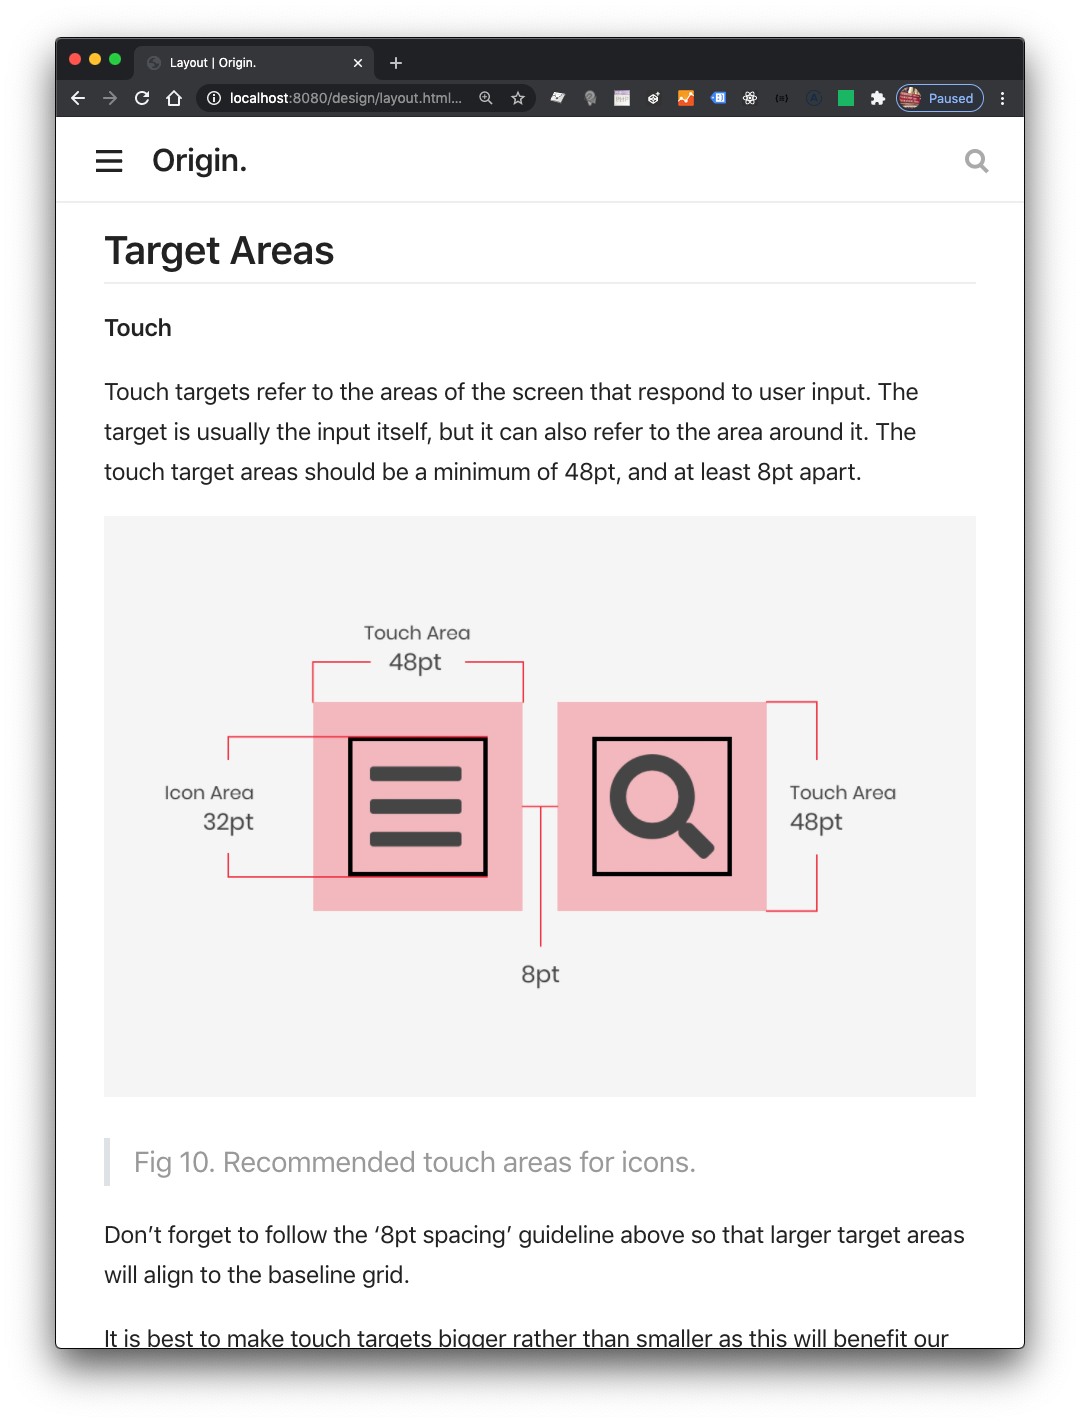 Detail of the Target Areas sub-section from Origin's Mobile-First Design section